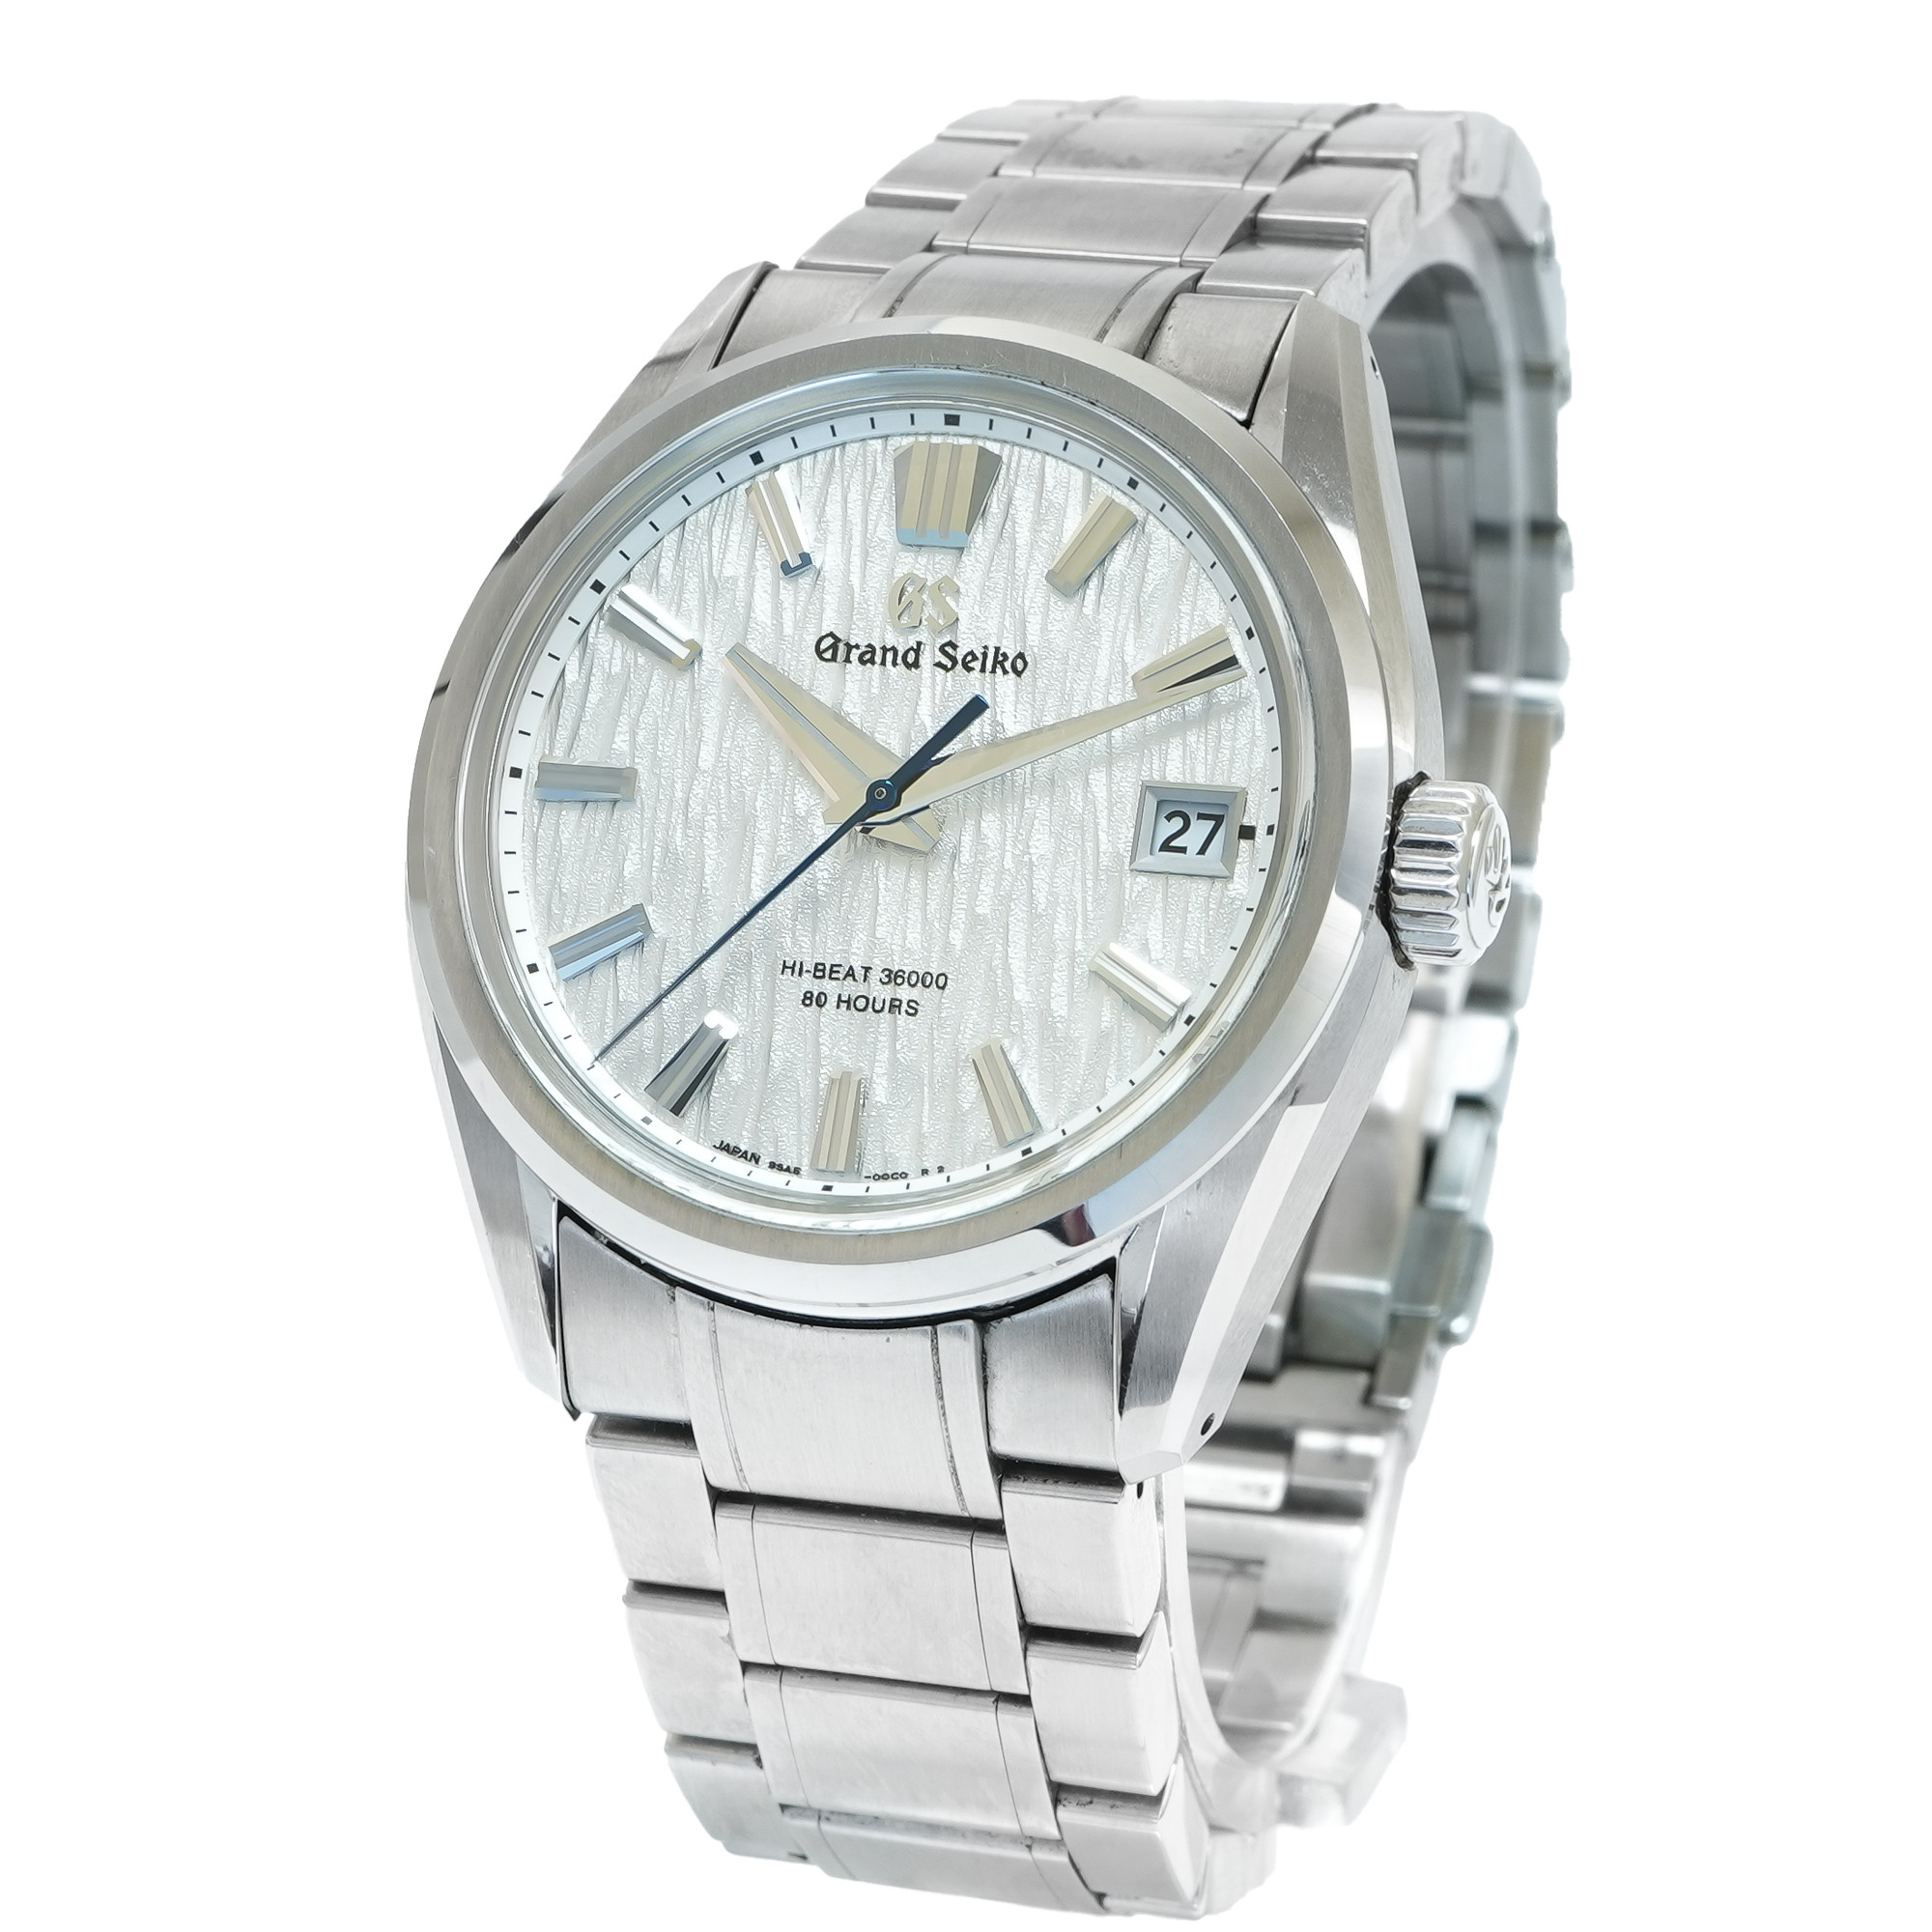 Grand Seiko Heritage Collection - Hi Beat 36000 Automatic White Birch SLGH005 - Inventory 5624